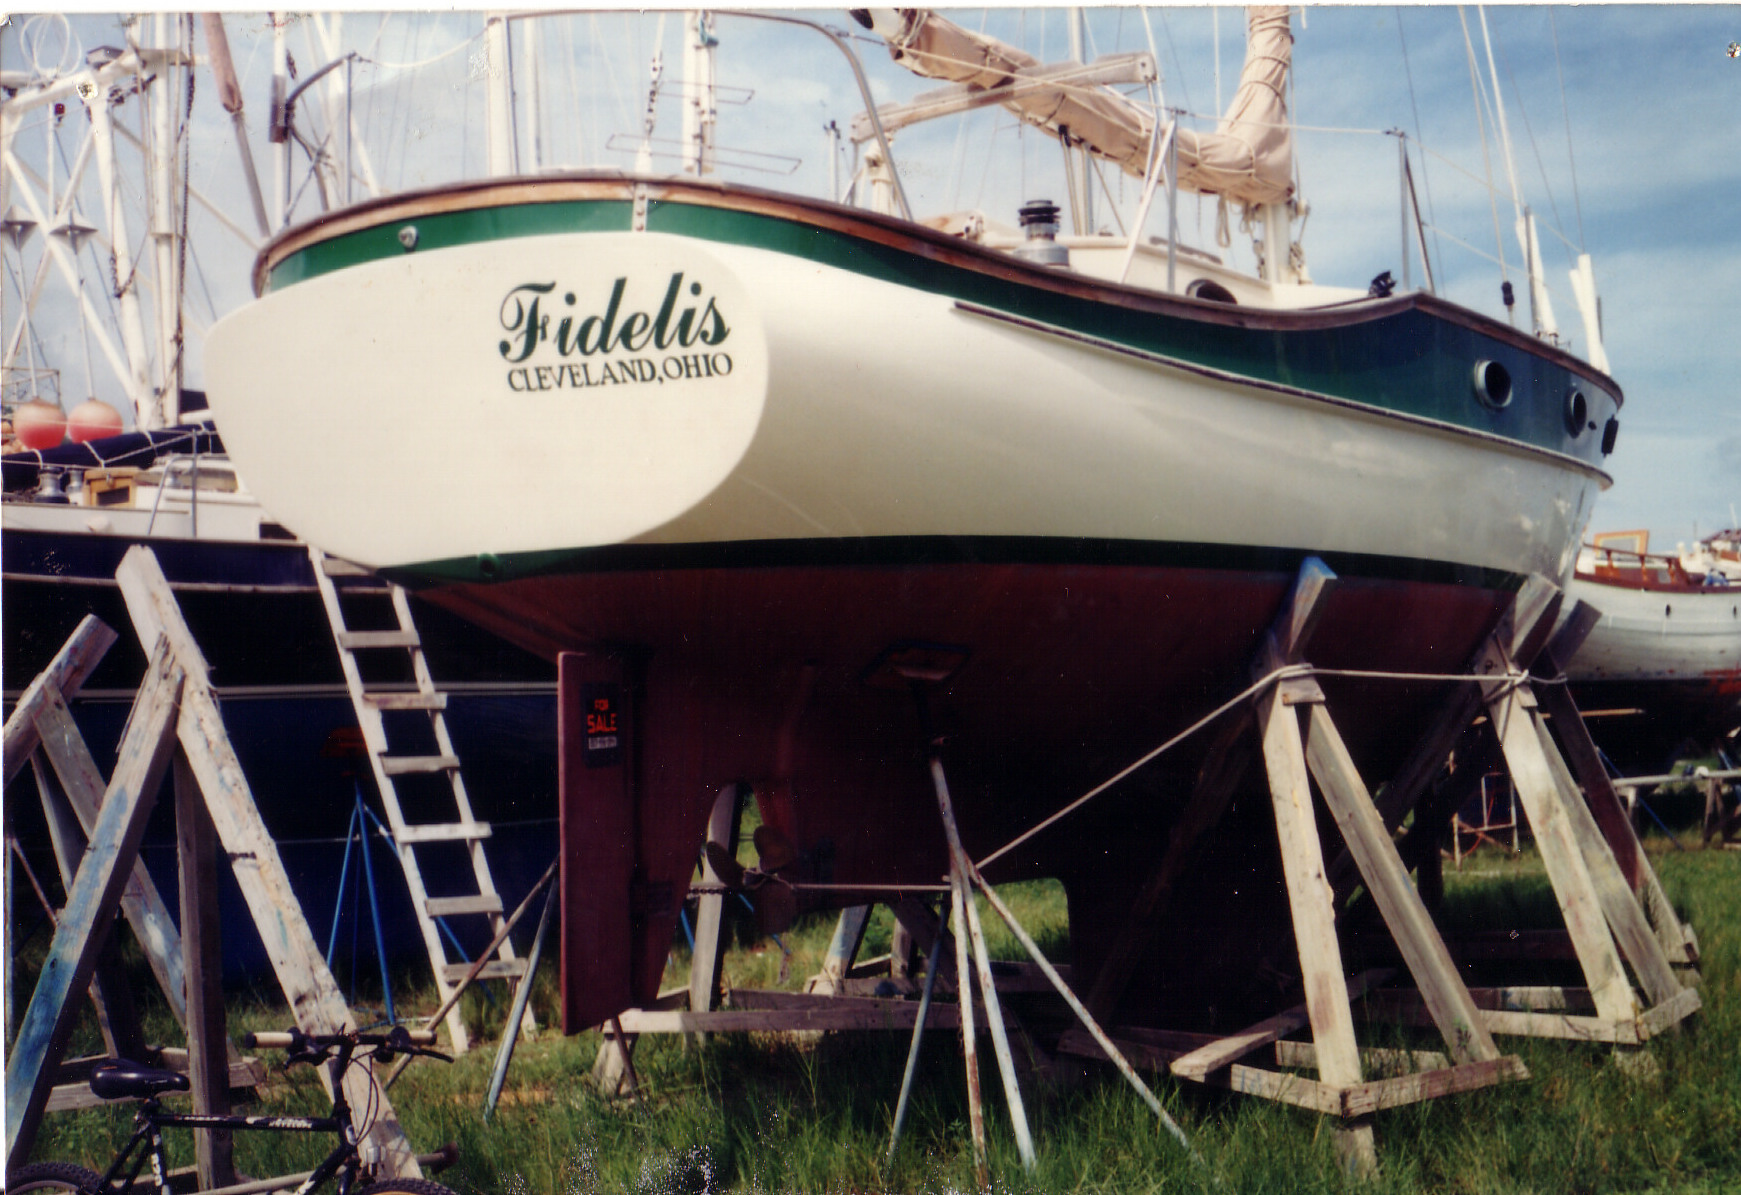 The Story of Fidelis